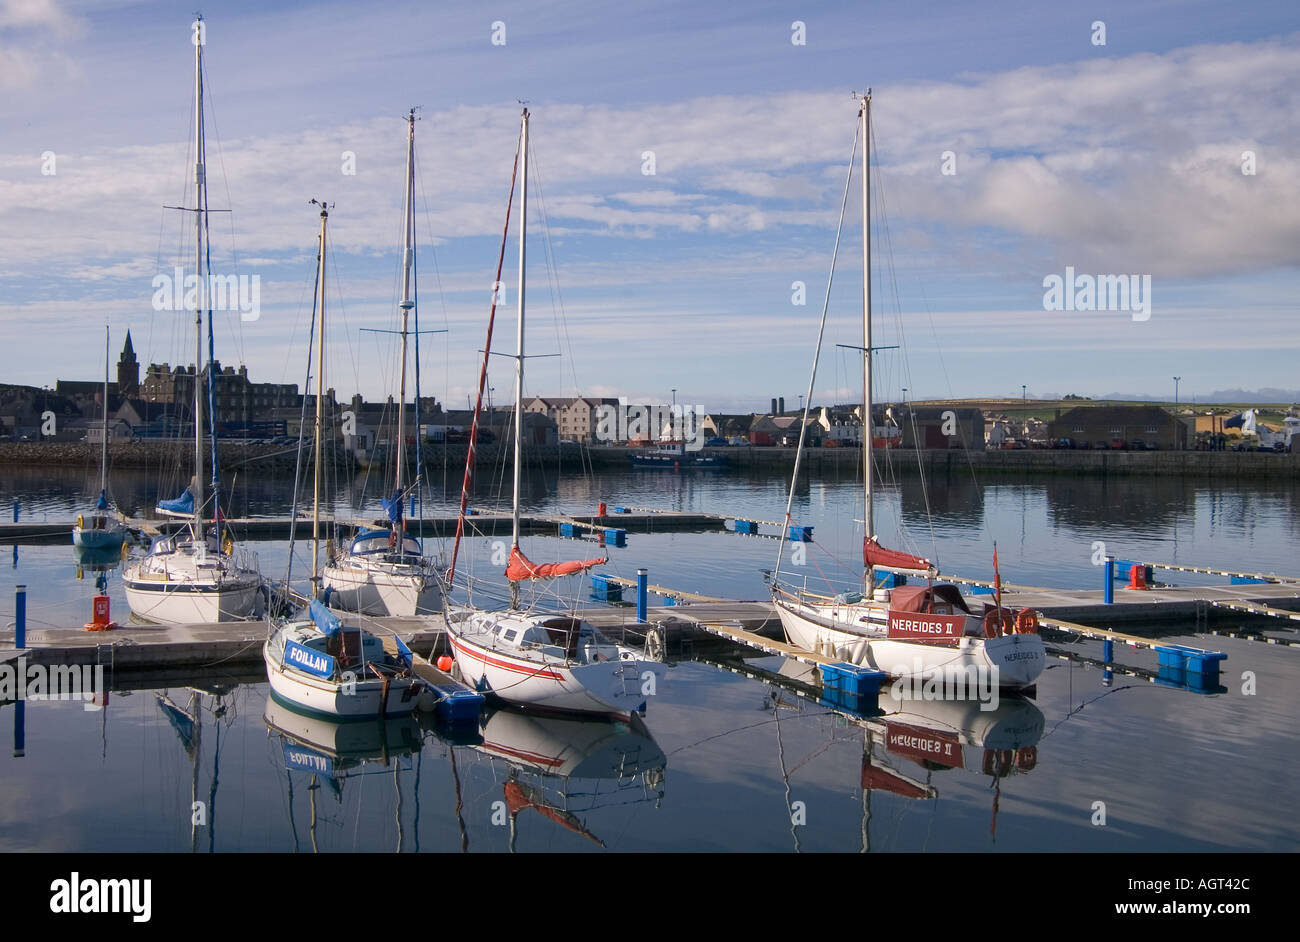 dh Kirkwall Marina KIRKWALL ORKNEY Boats leisure craft yacht berthed quayside jetty Kirkwall harbour Stock Photo